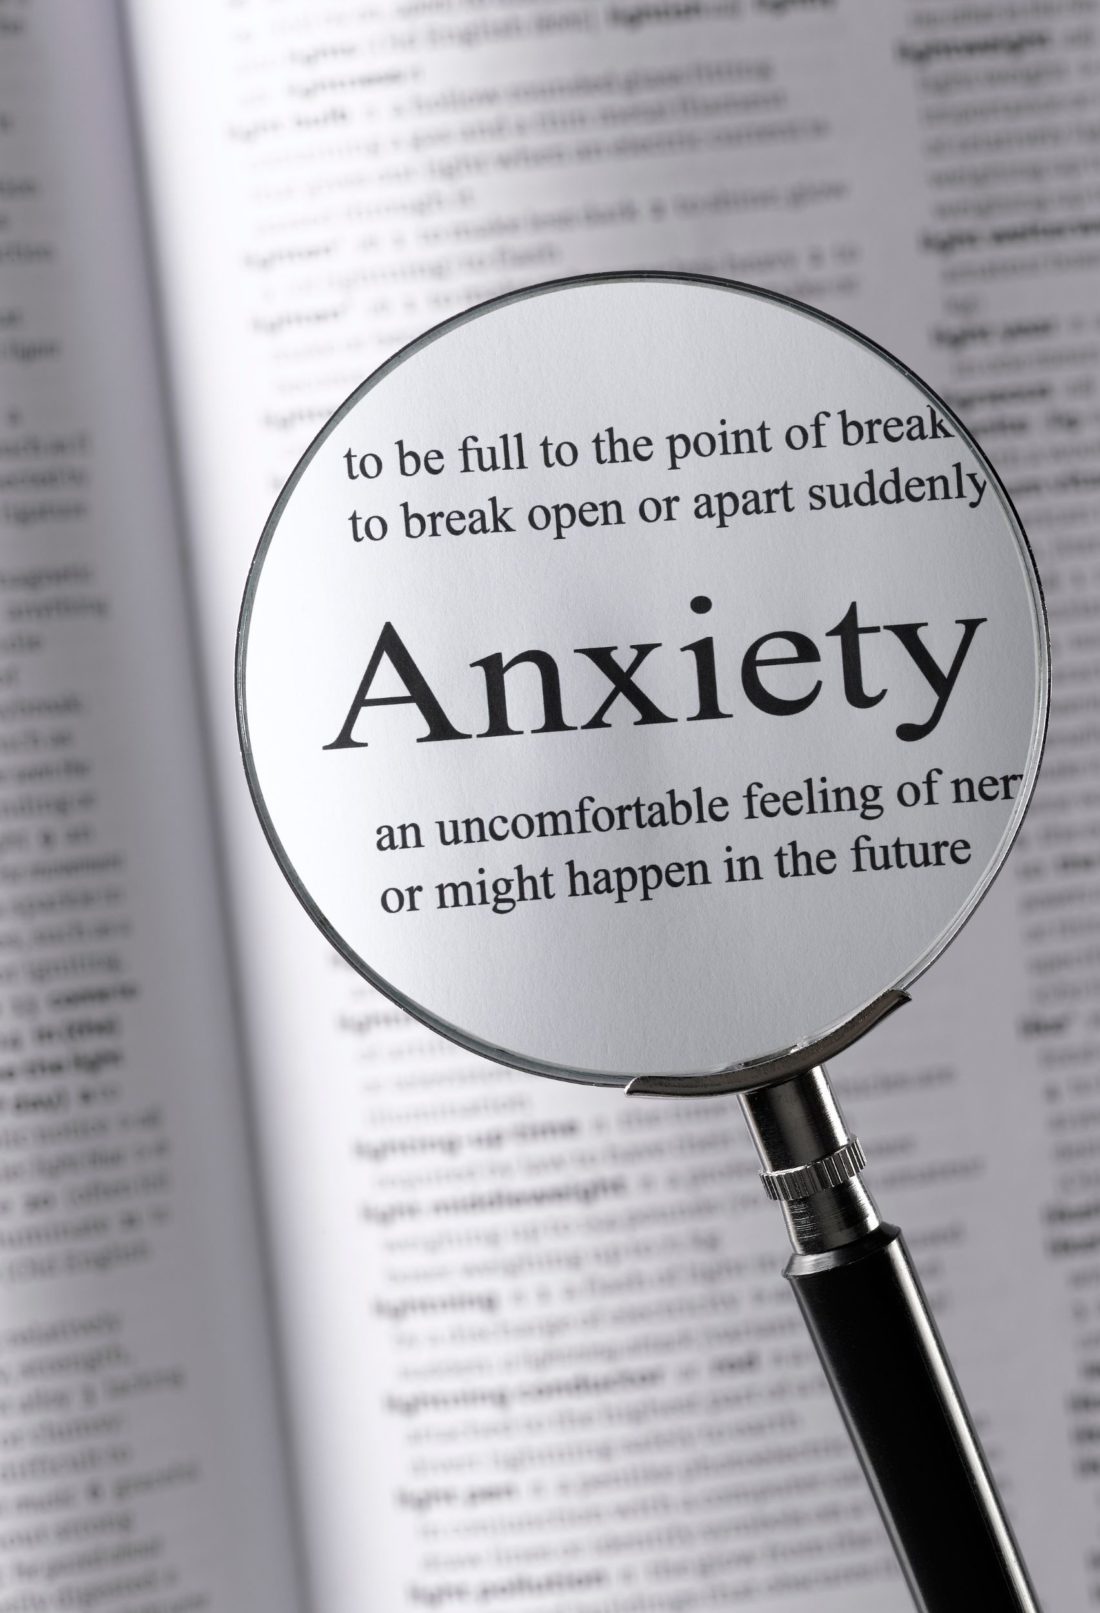 13 Unusual Symptoms Of Anxiety That May Surprise You